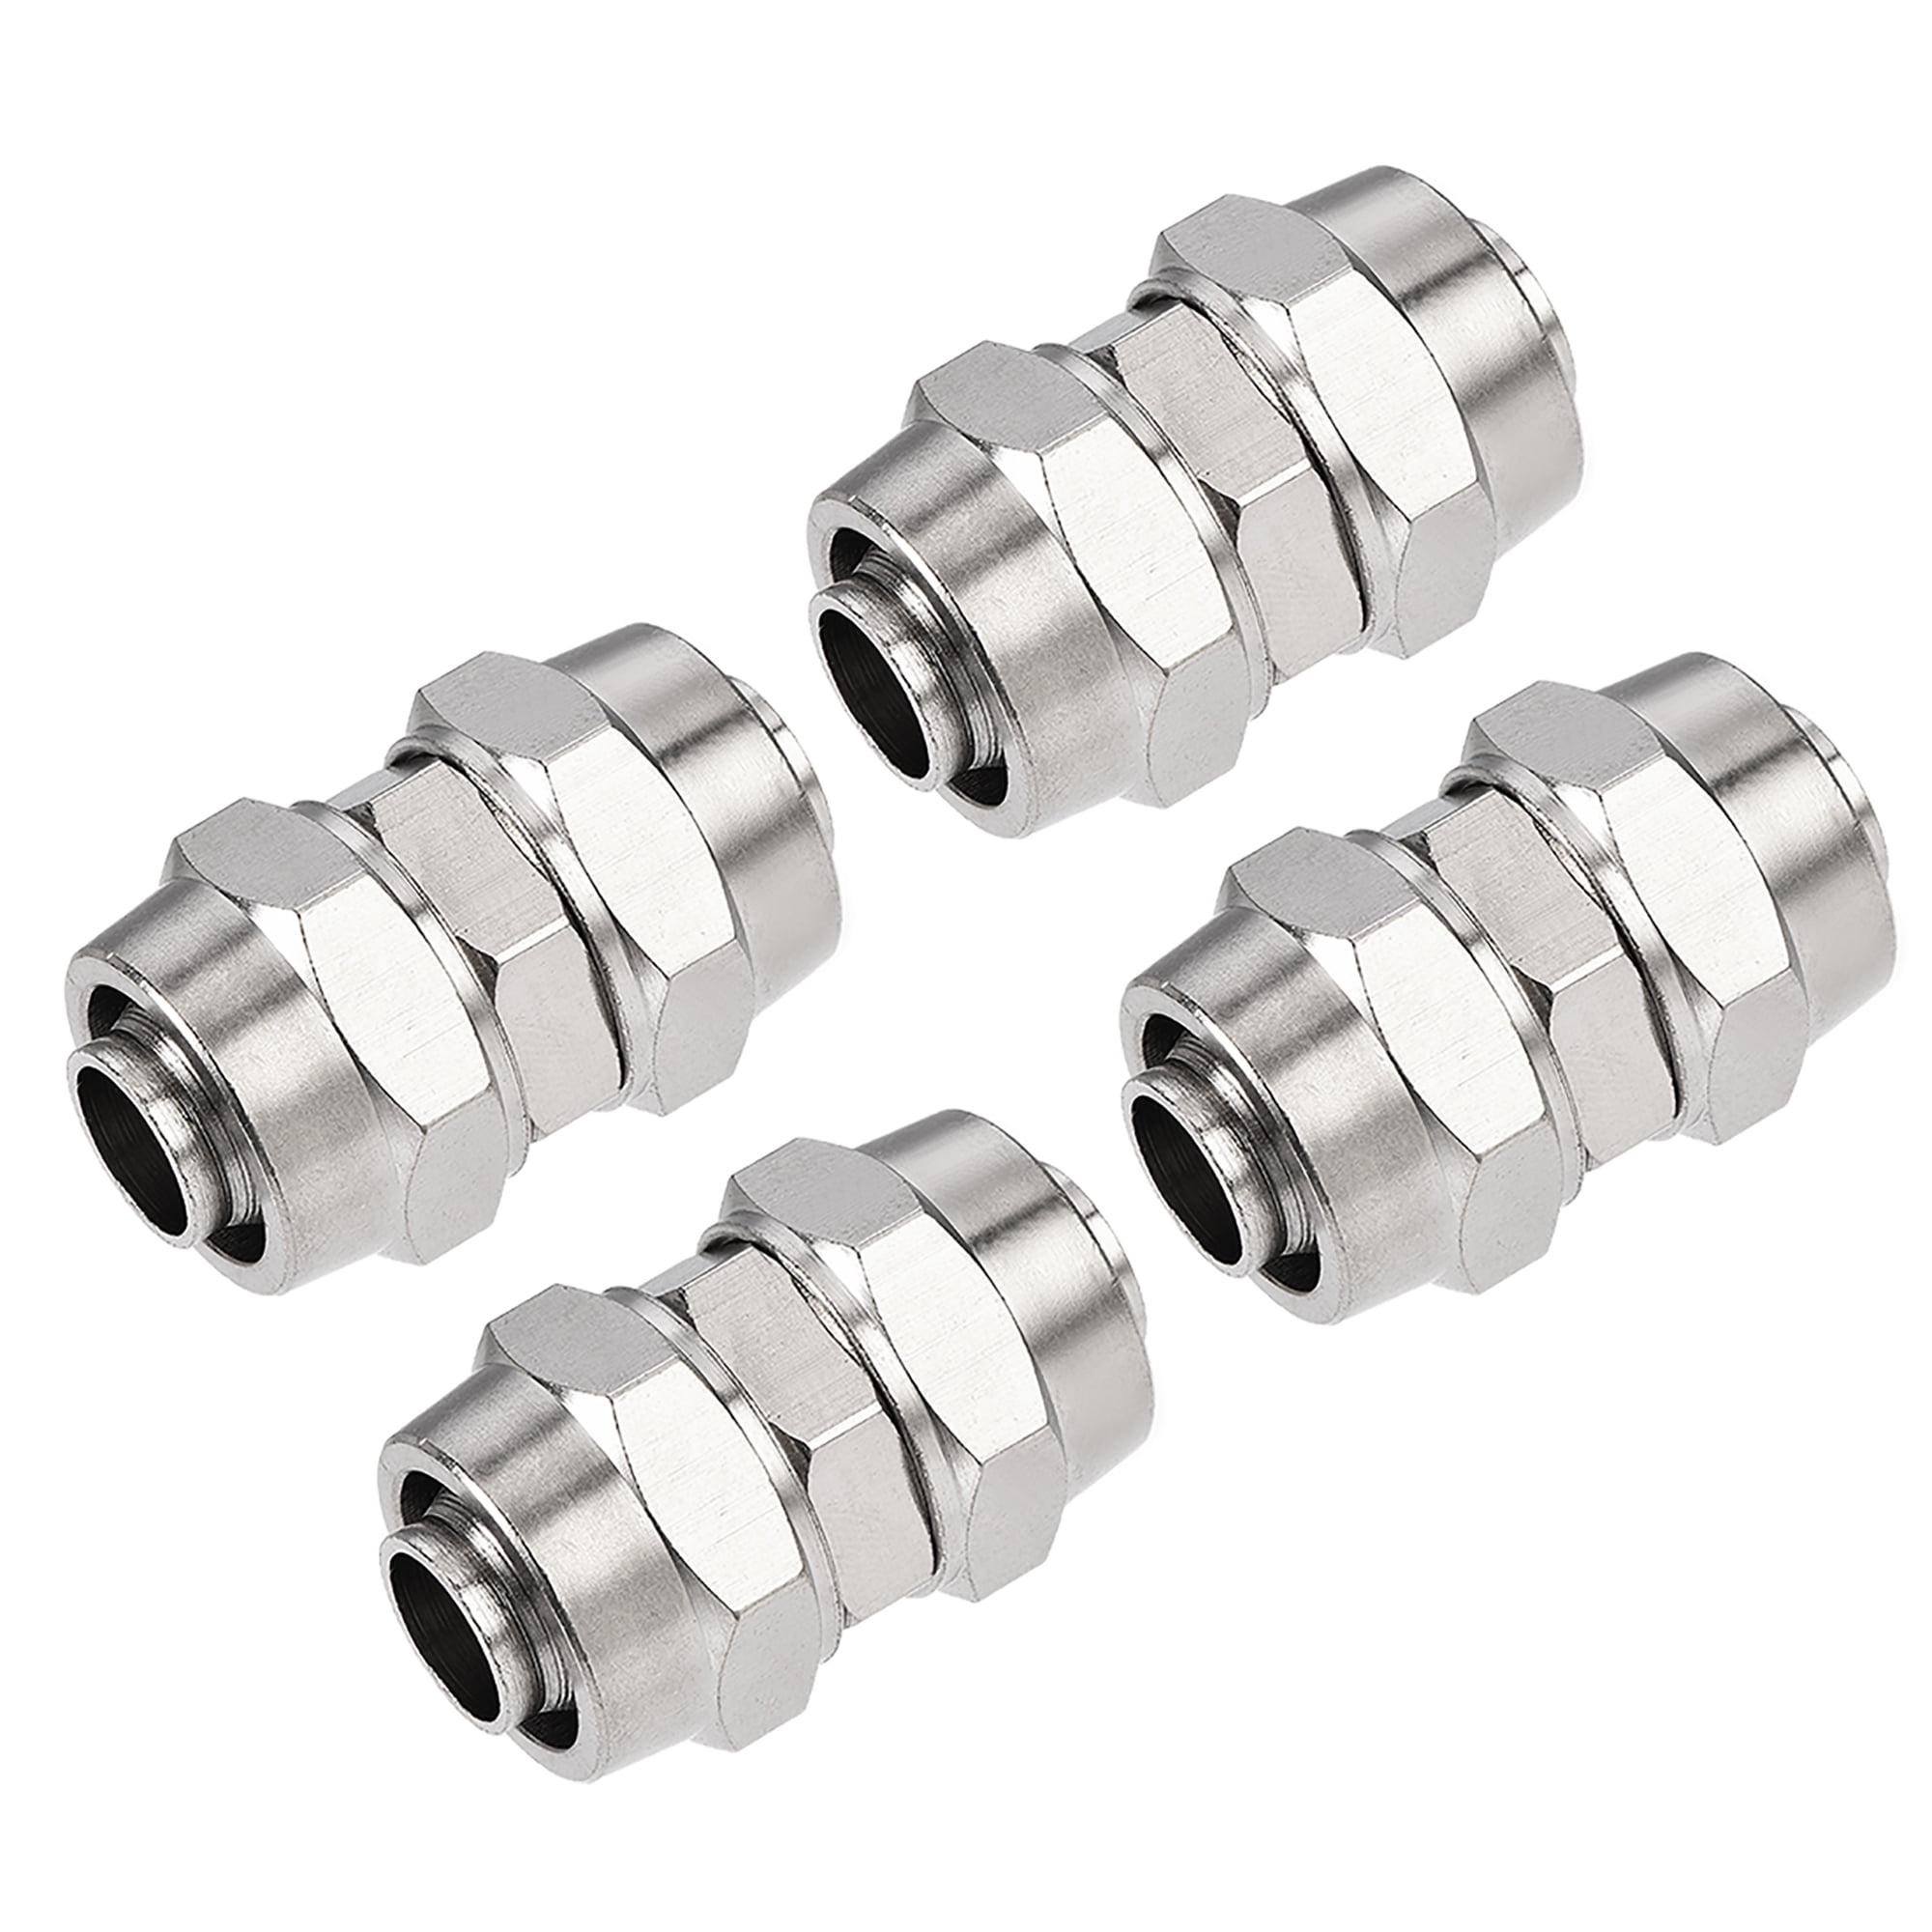 uxcell Compression Tube Fitting Nickel Plating for 10mm Pneumatic Hose Tube 4pcs